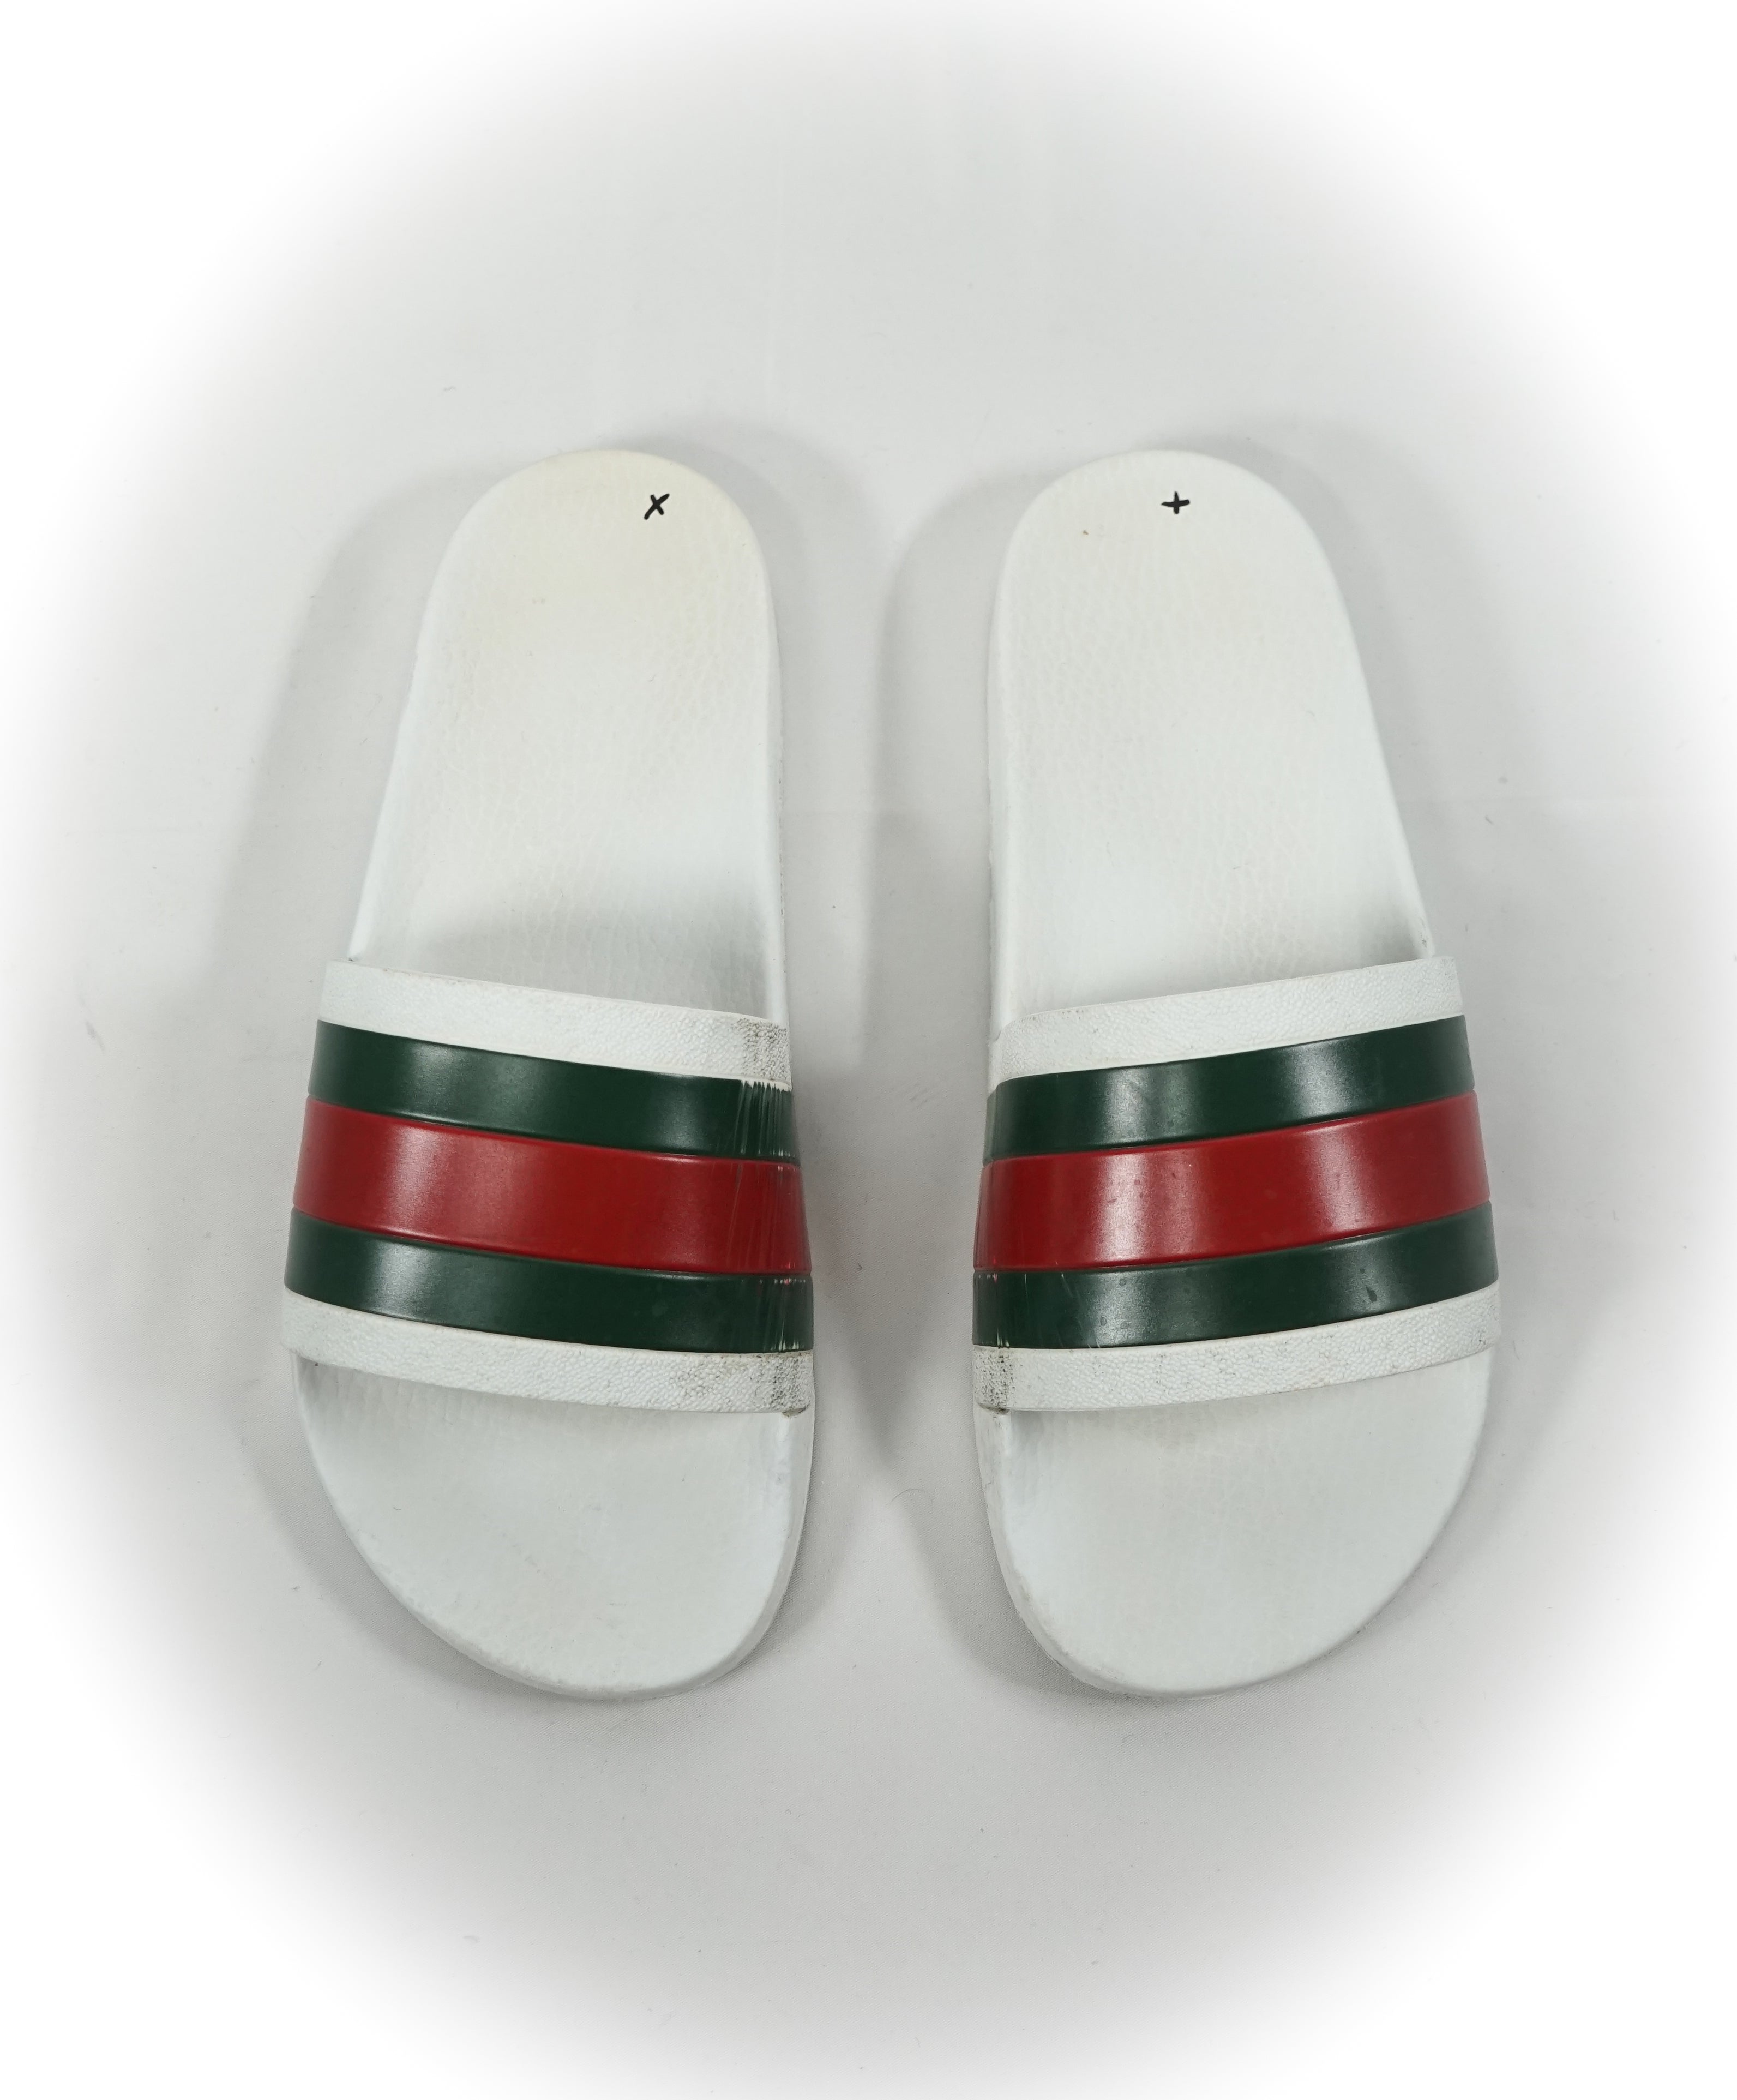 gucci flip flops green and red